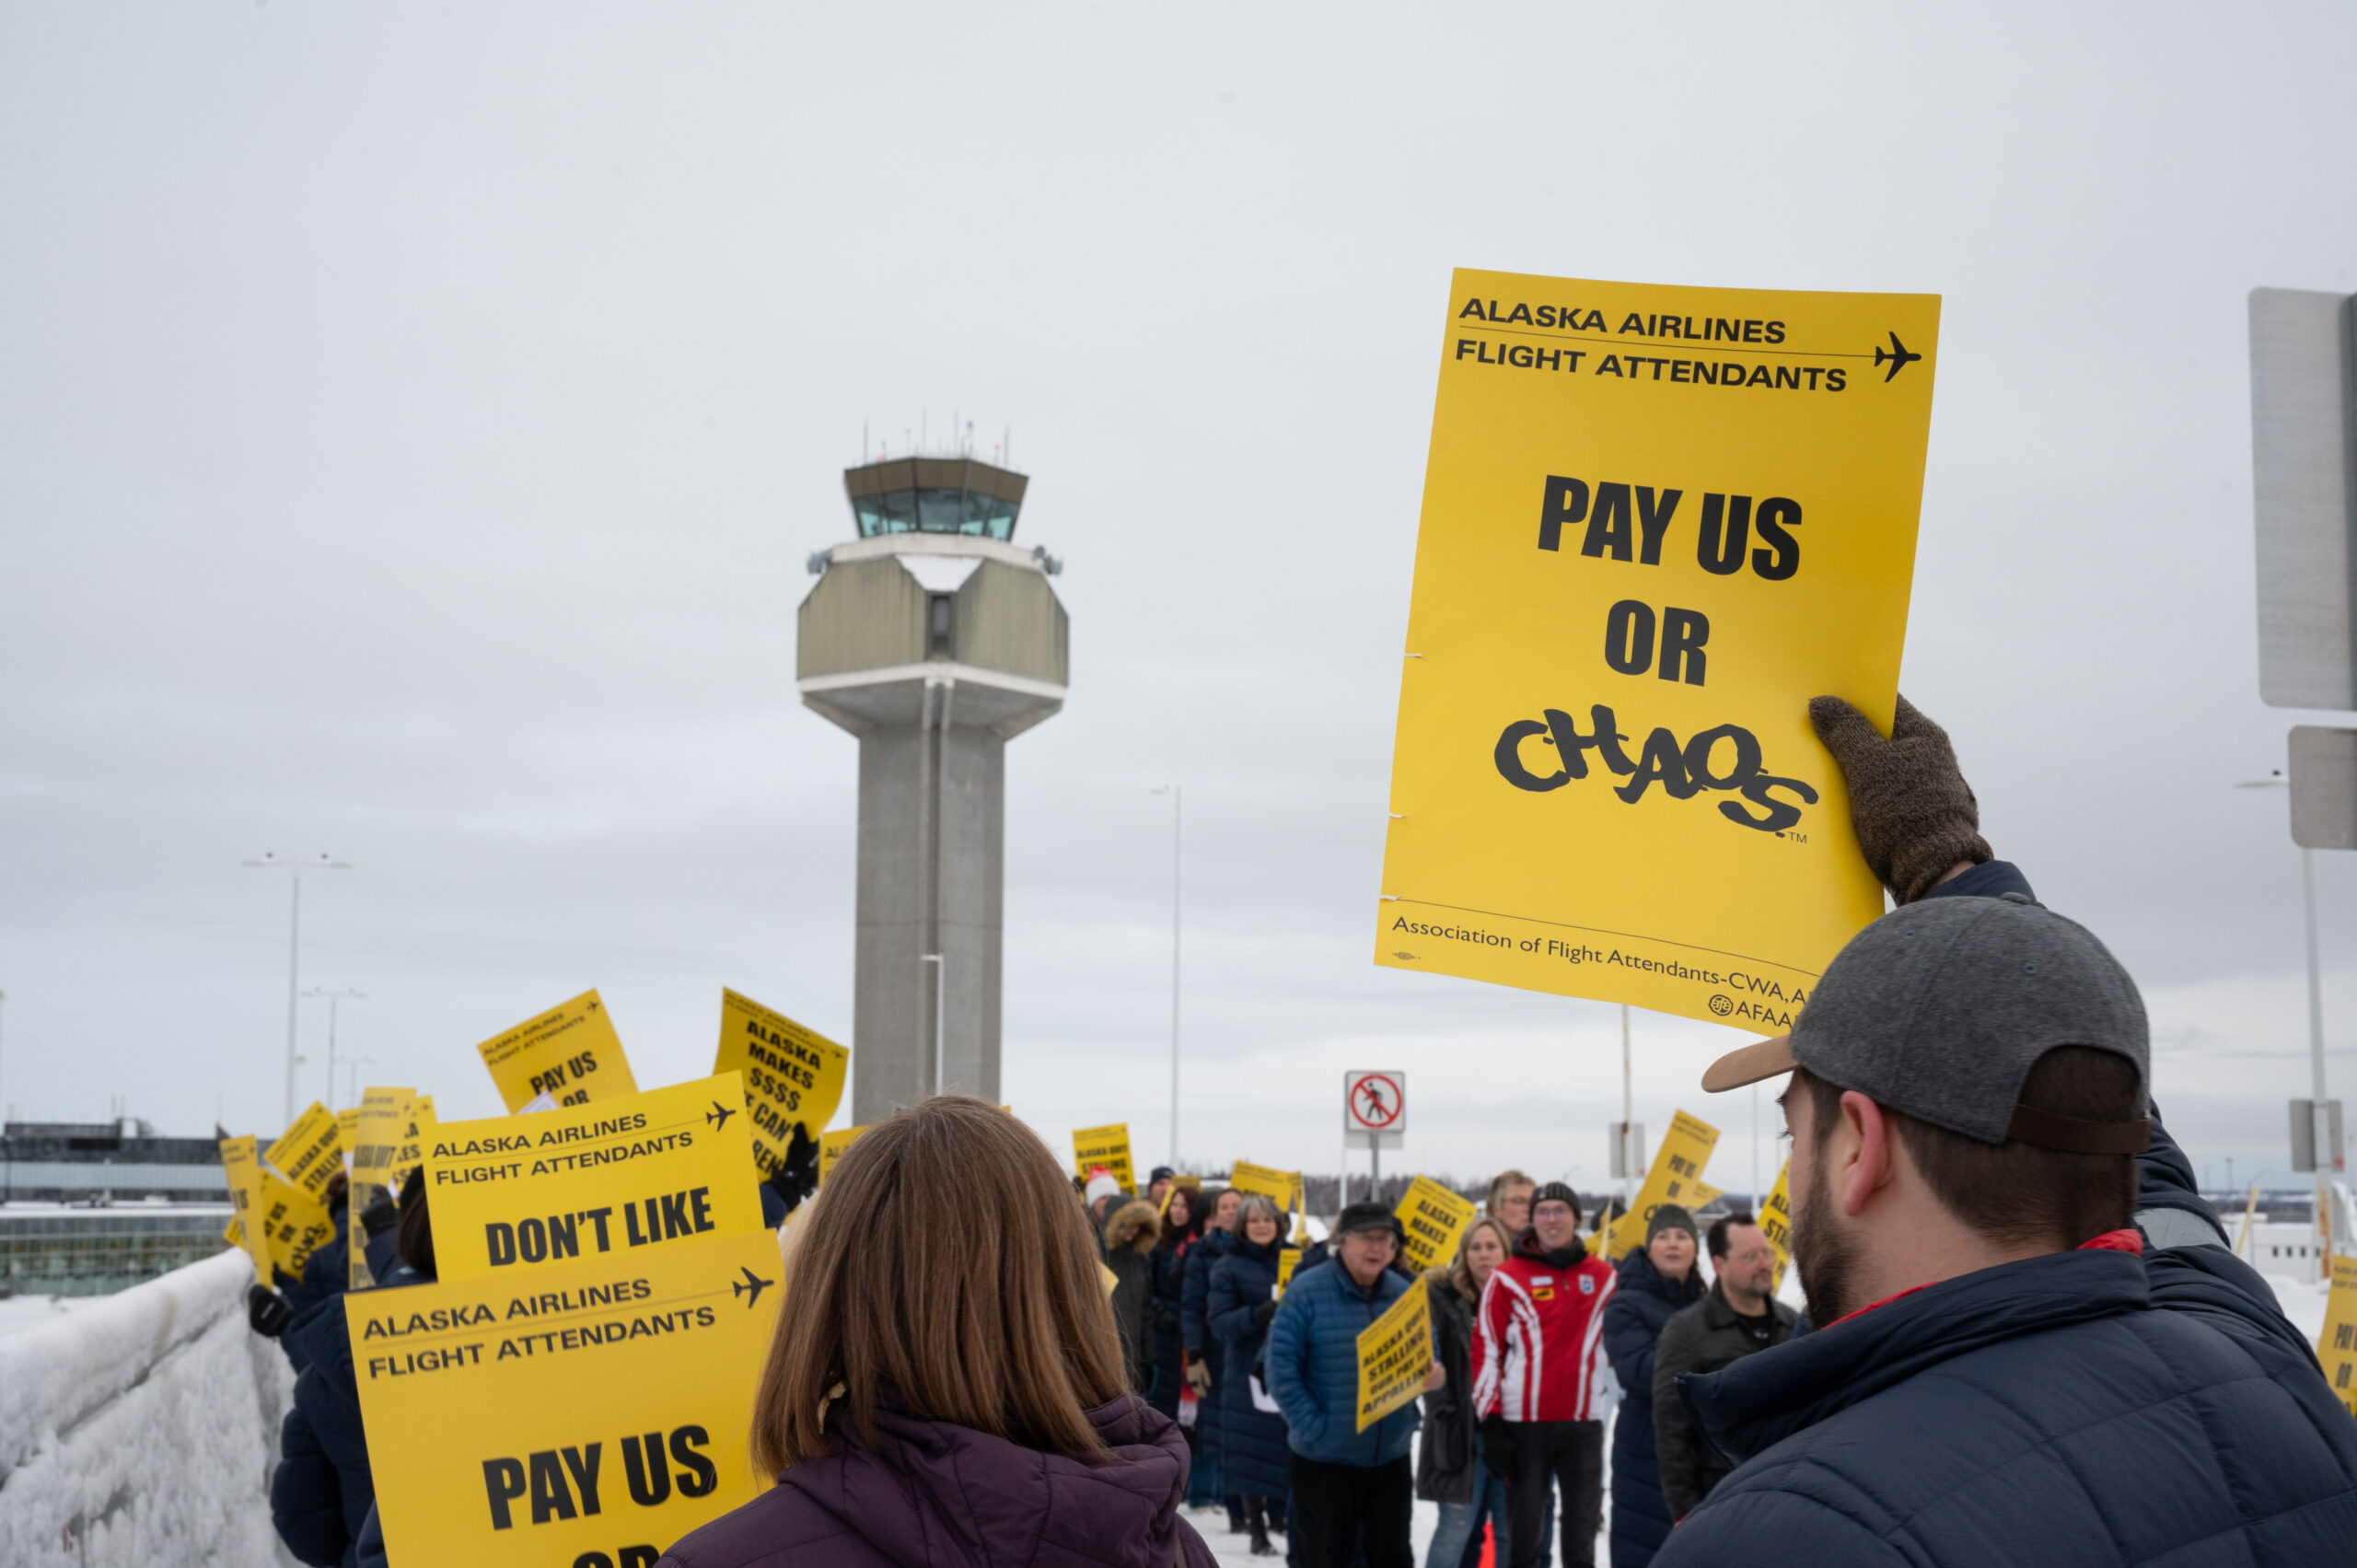 Flight attendants hold signs in a picket line outdoors, with an airport control tower in the background